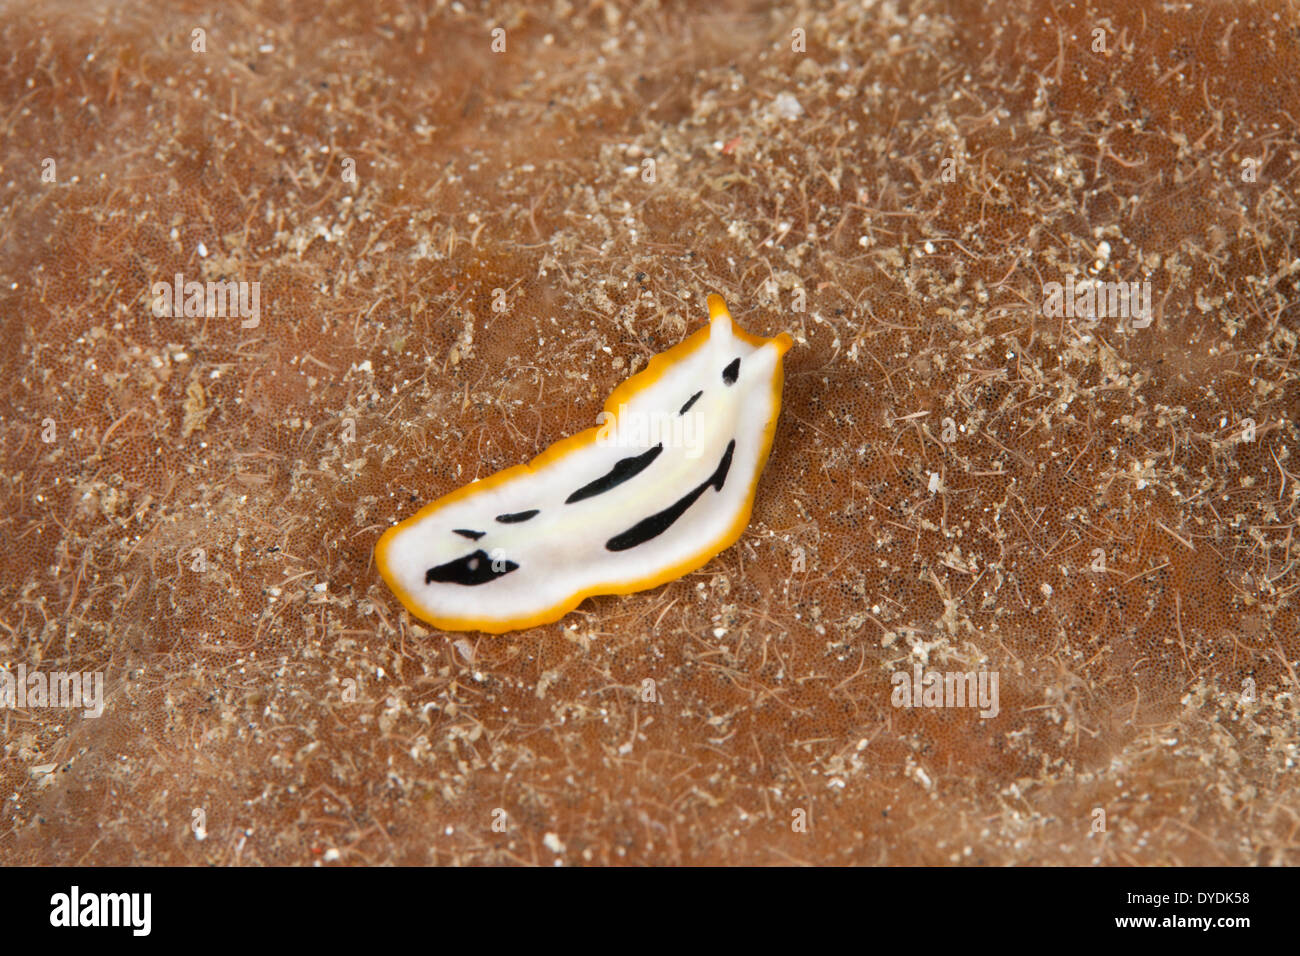 Seal Slug crawling on coral in the Lembeh Strait off North Sulawesi, Indonesia. Stock Photo